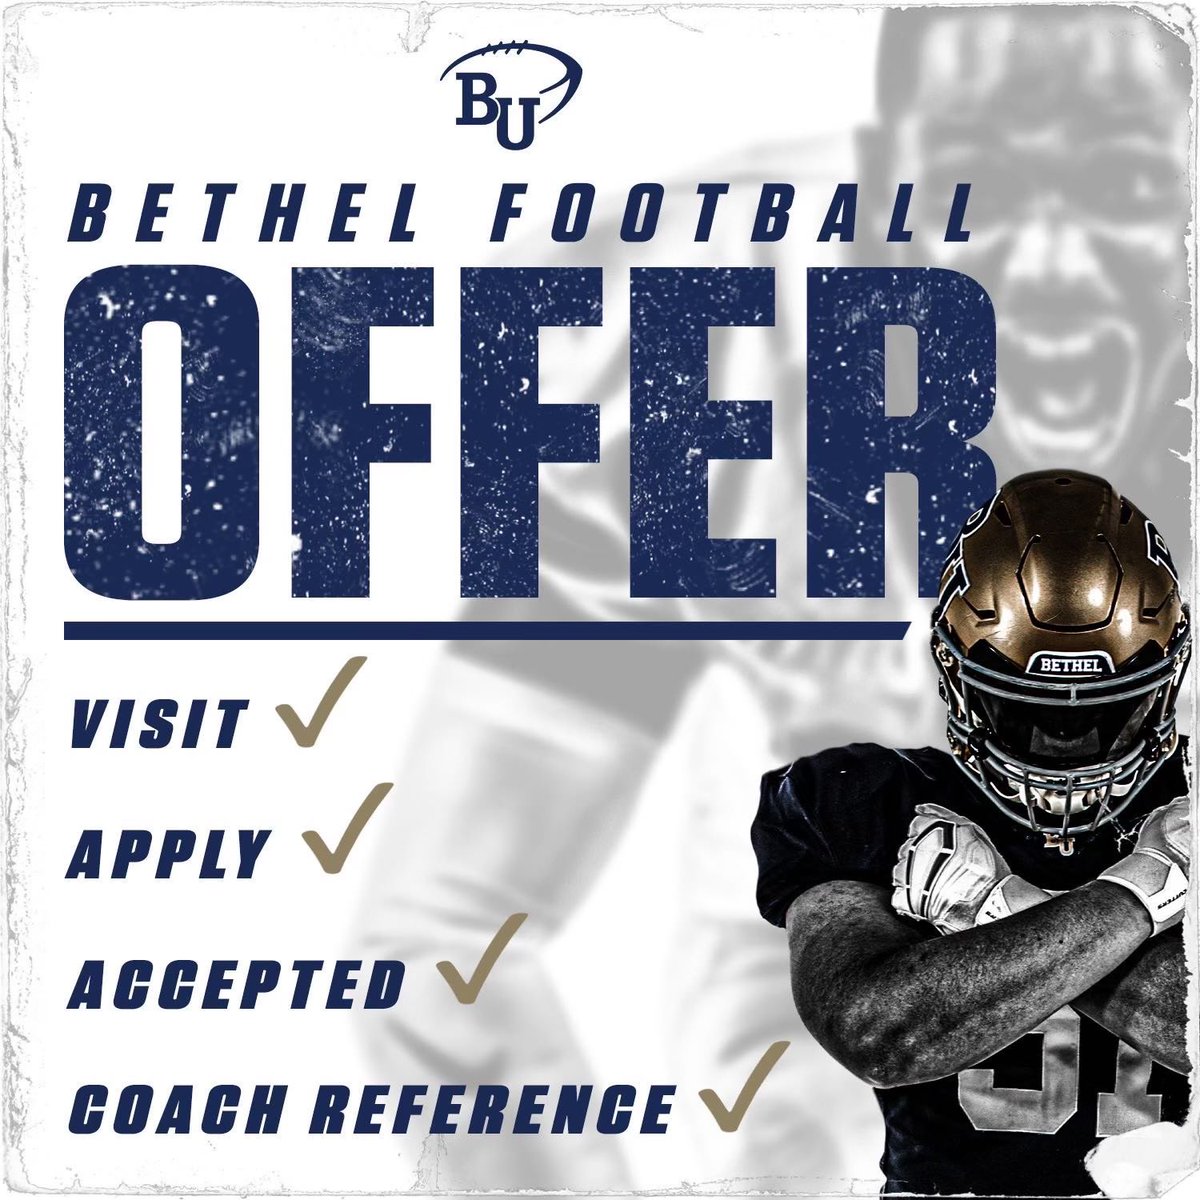 Excited to have received an offer from @BethelRoyalsFB. Thank you coaches for the opportunity.